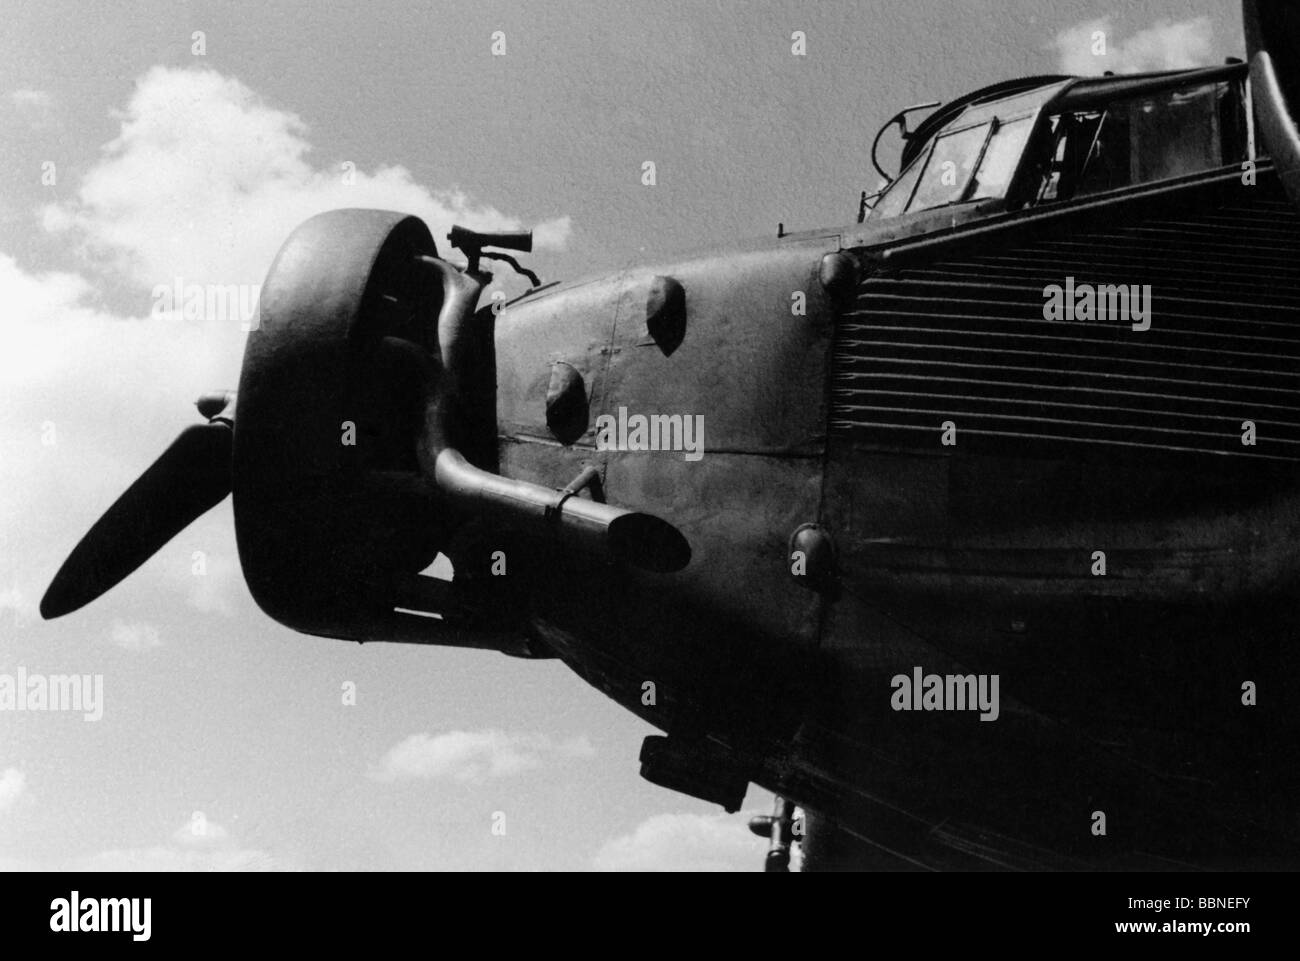 events, Second World War / WWII, aerial warfare, aircraft, details / interiors, engine of a German transport aircraft Junkers Ju 52, Stock Photo